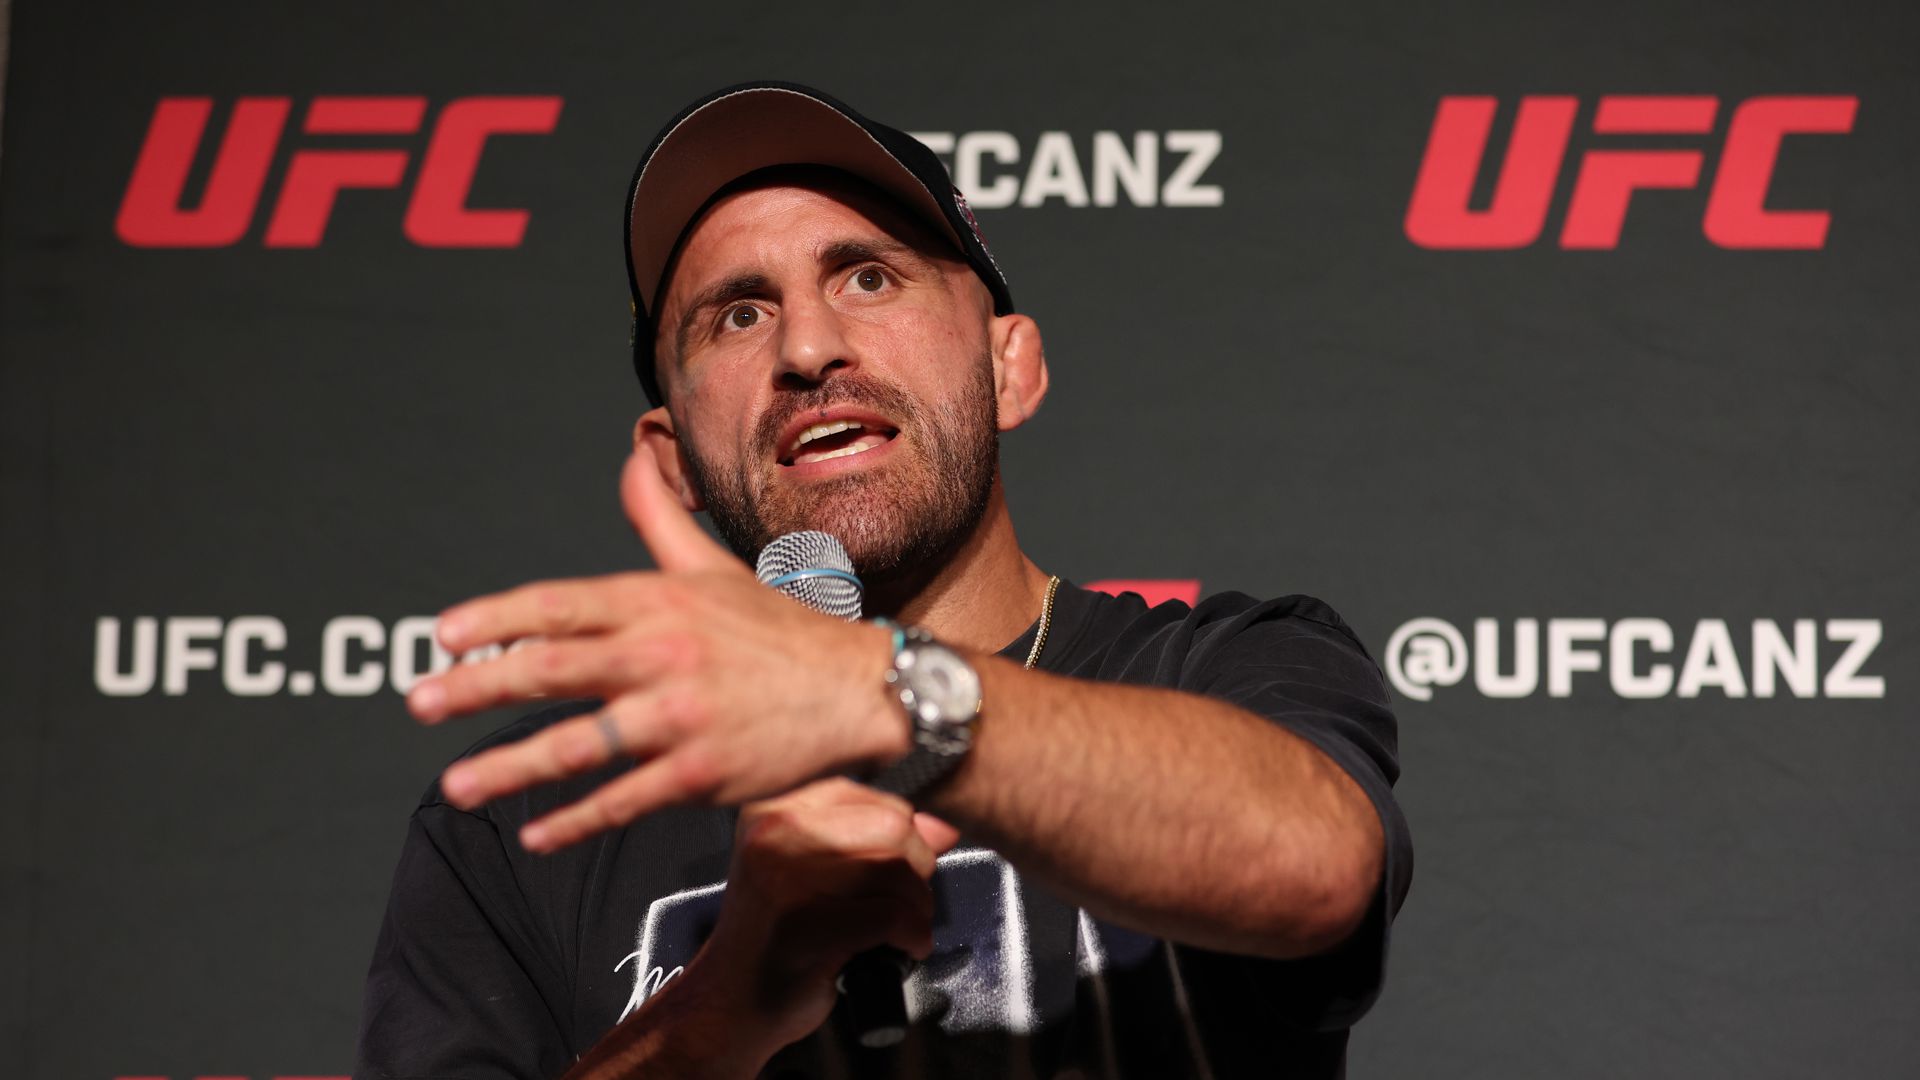 alexander volkanovski regrets ‘drinking every day for 3 or 4 weeks’ before ufc offered islam makhachev rematch